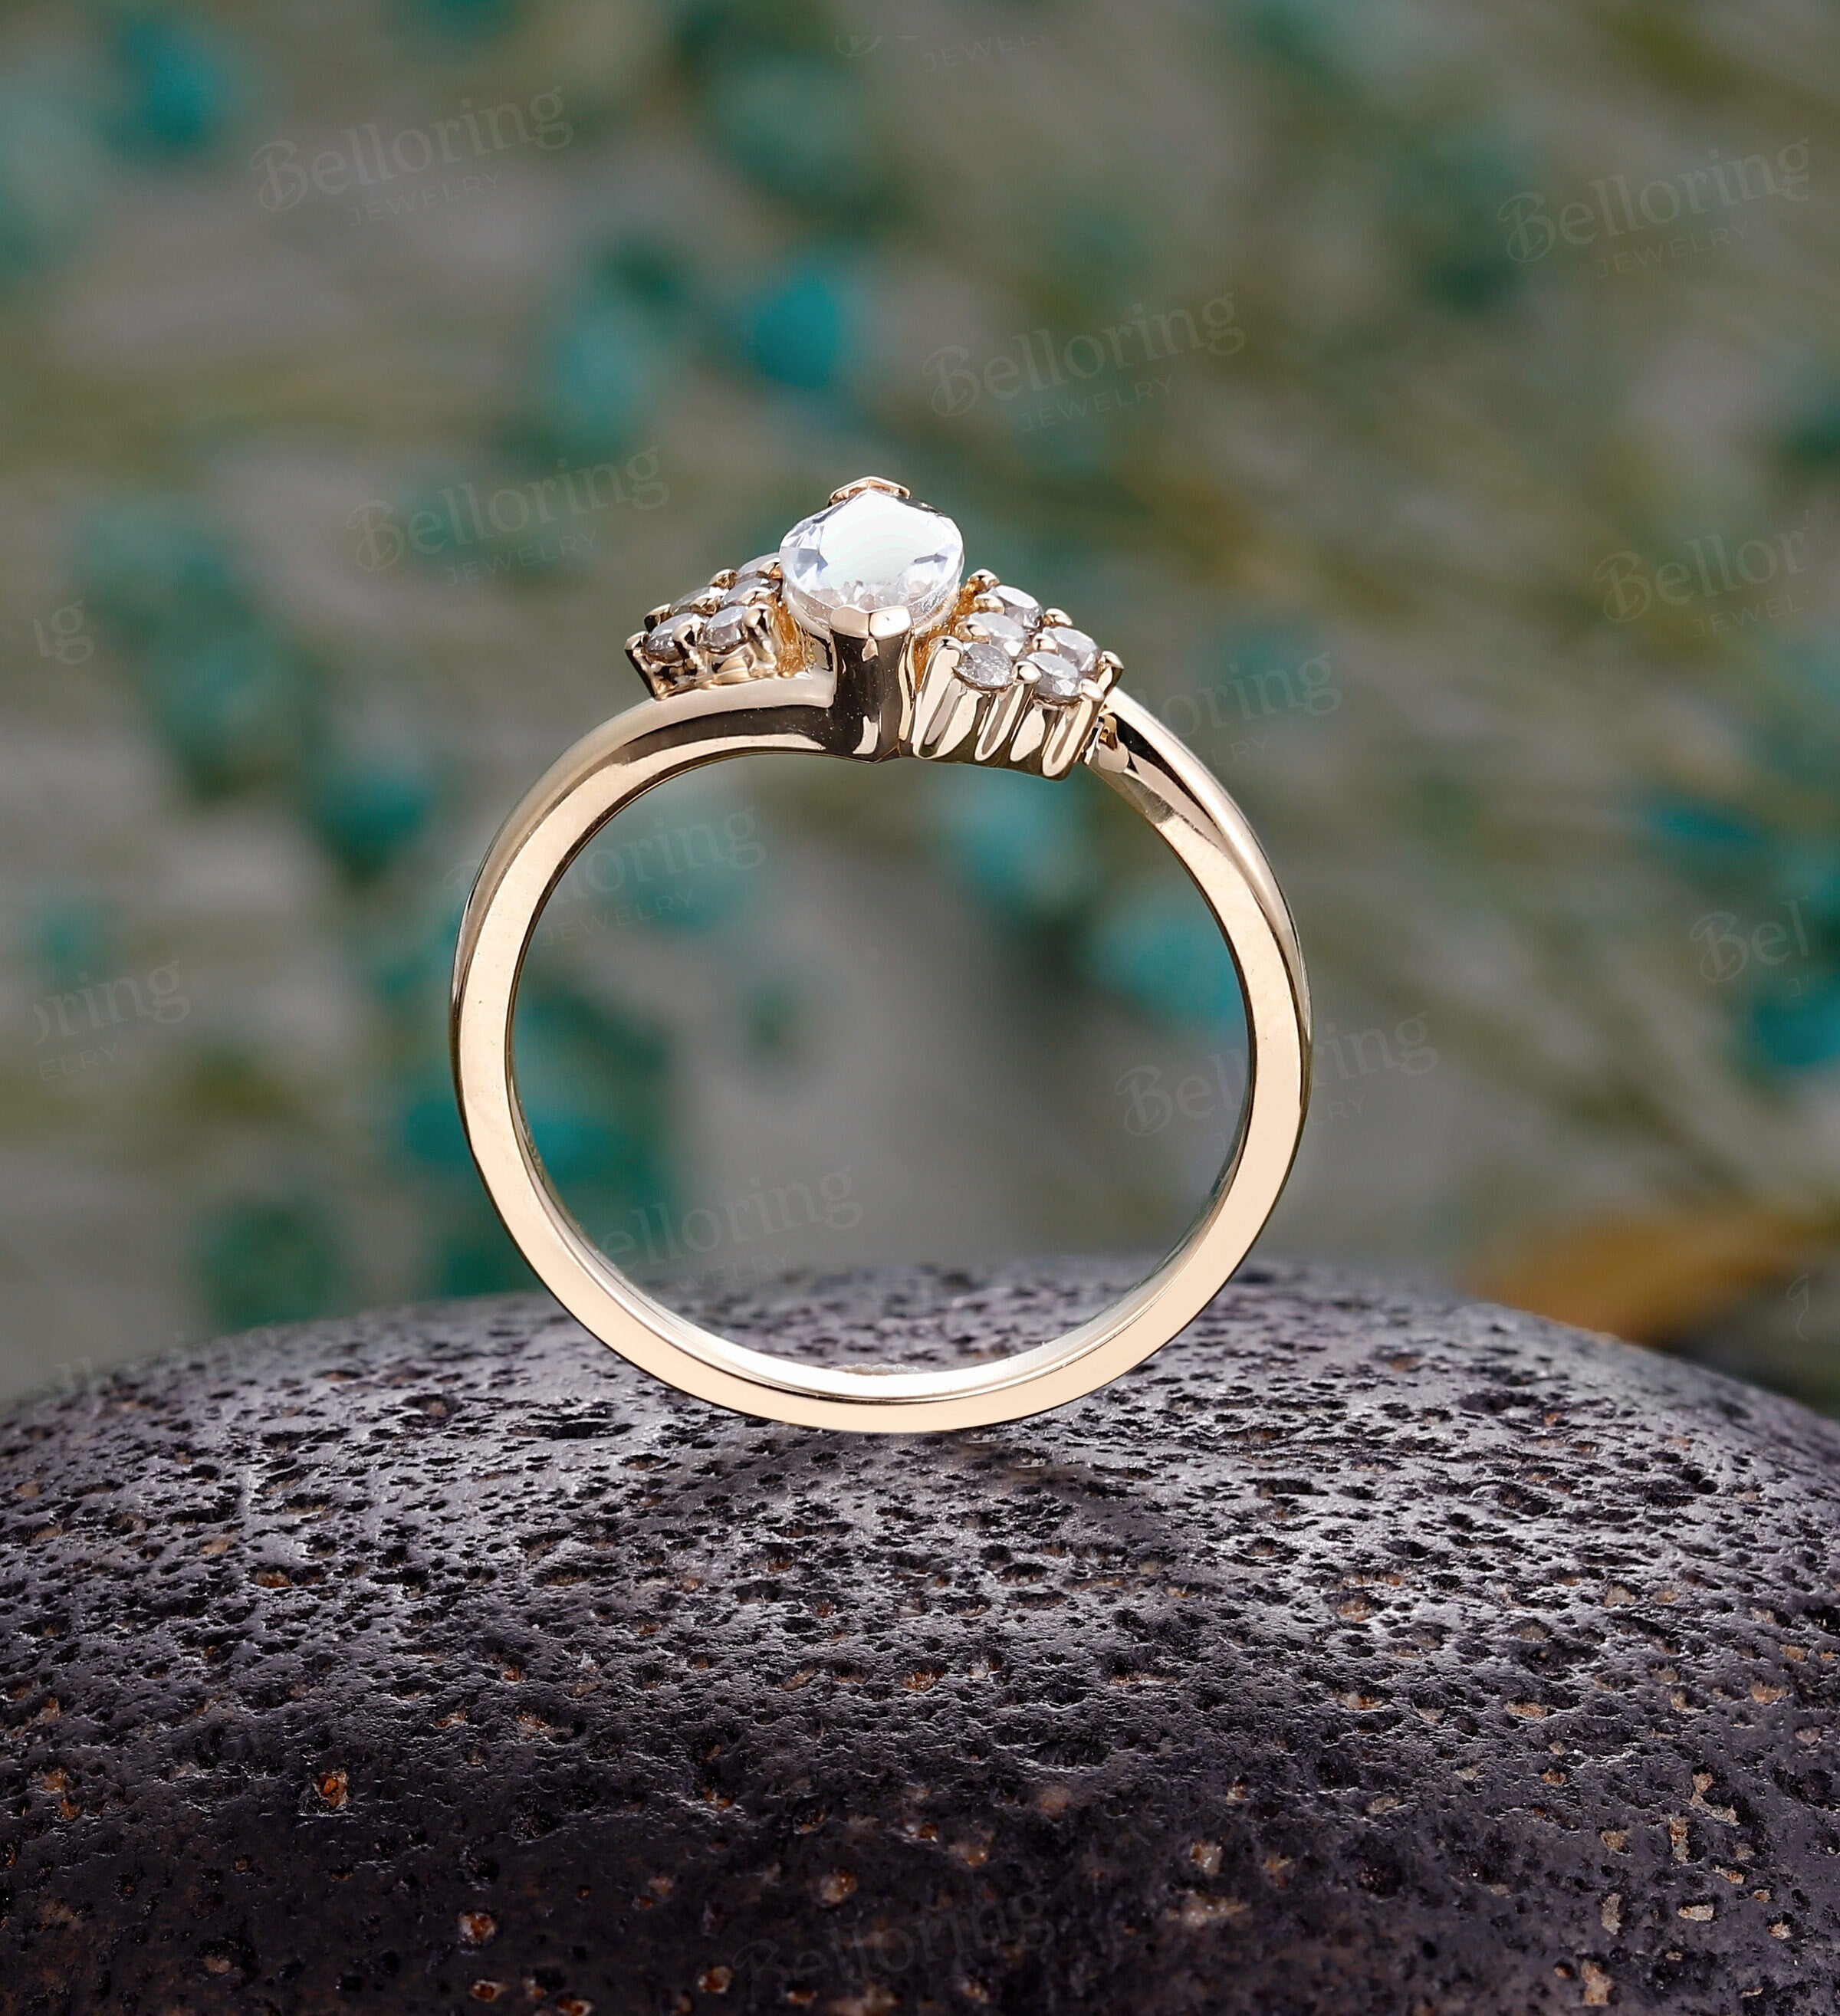 French Antique 14K White Gold 3.0 Carat White Sapphire Diamond Solitaire  Wedding Ring Y235-14KWGDWS | ClassicEngagementRing.com